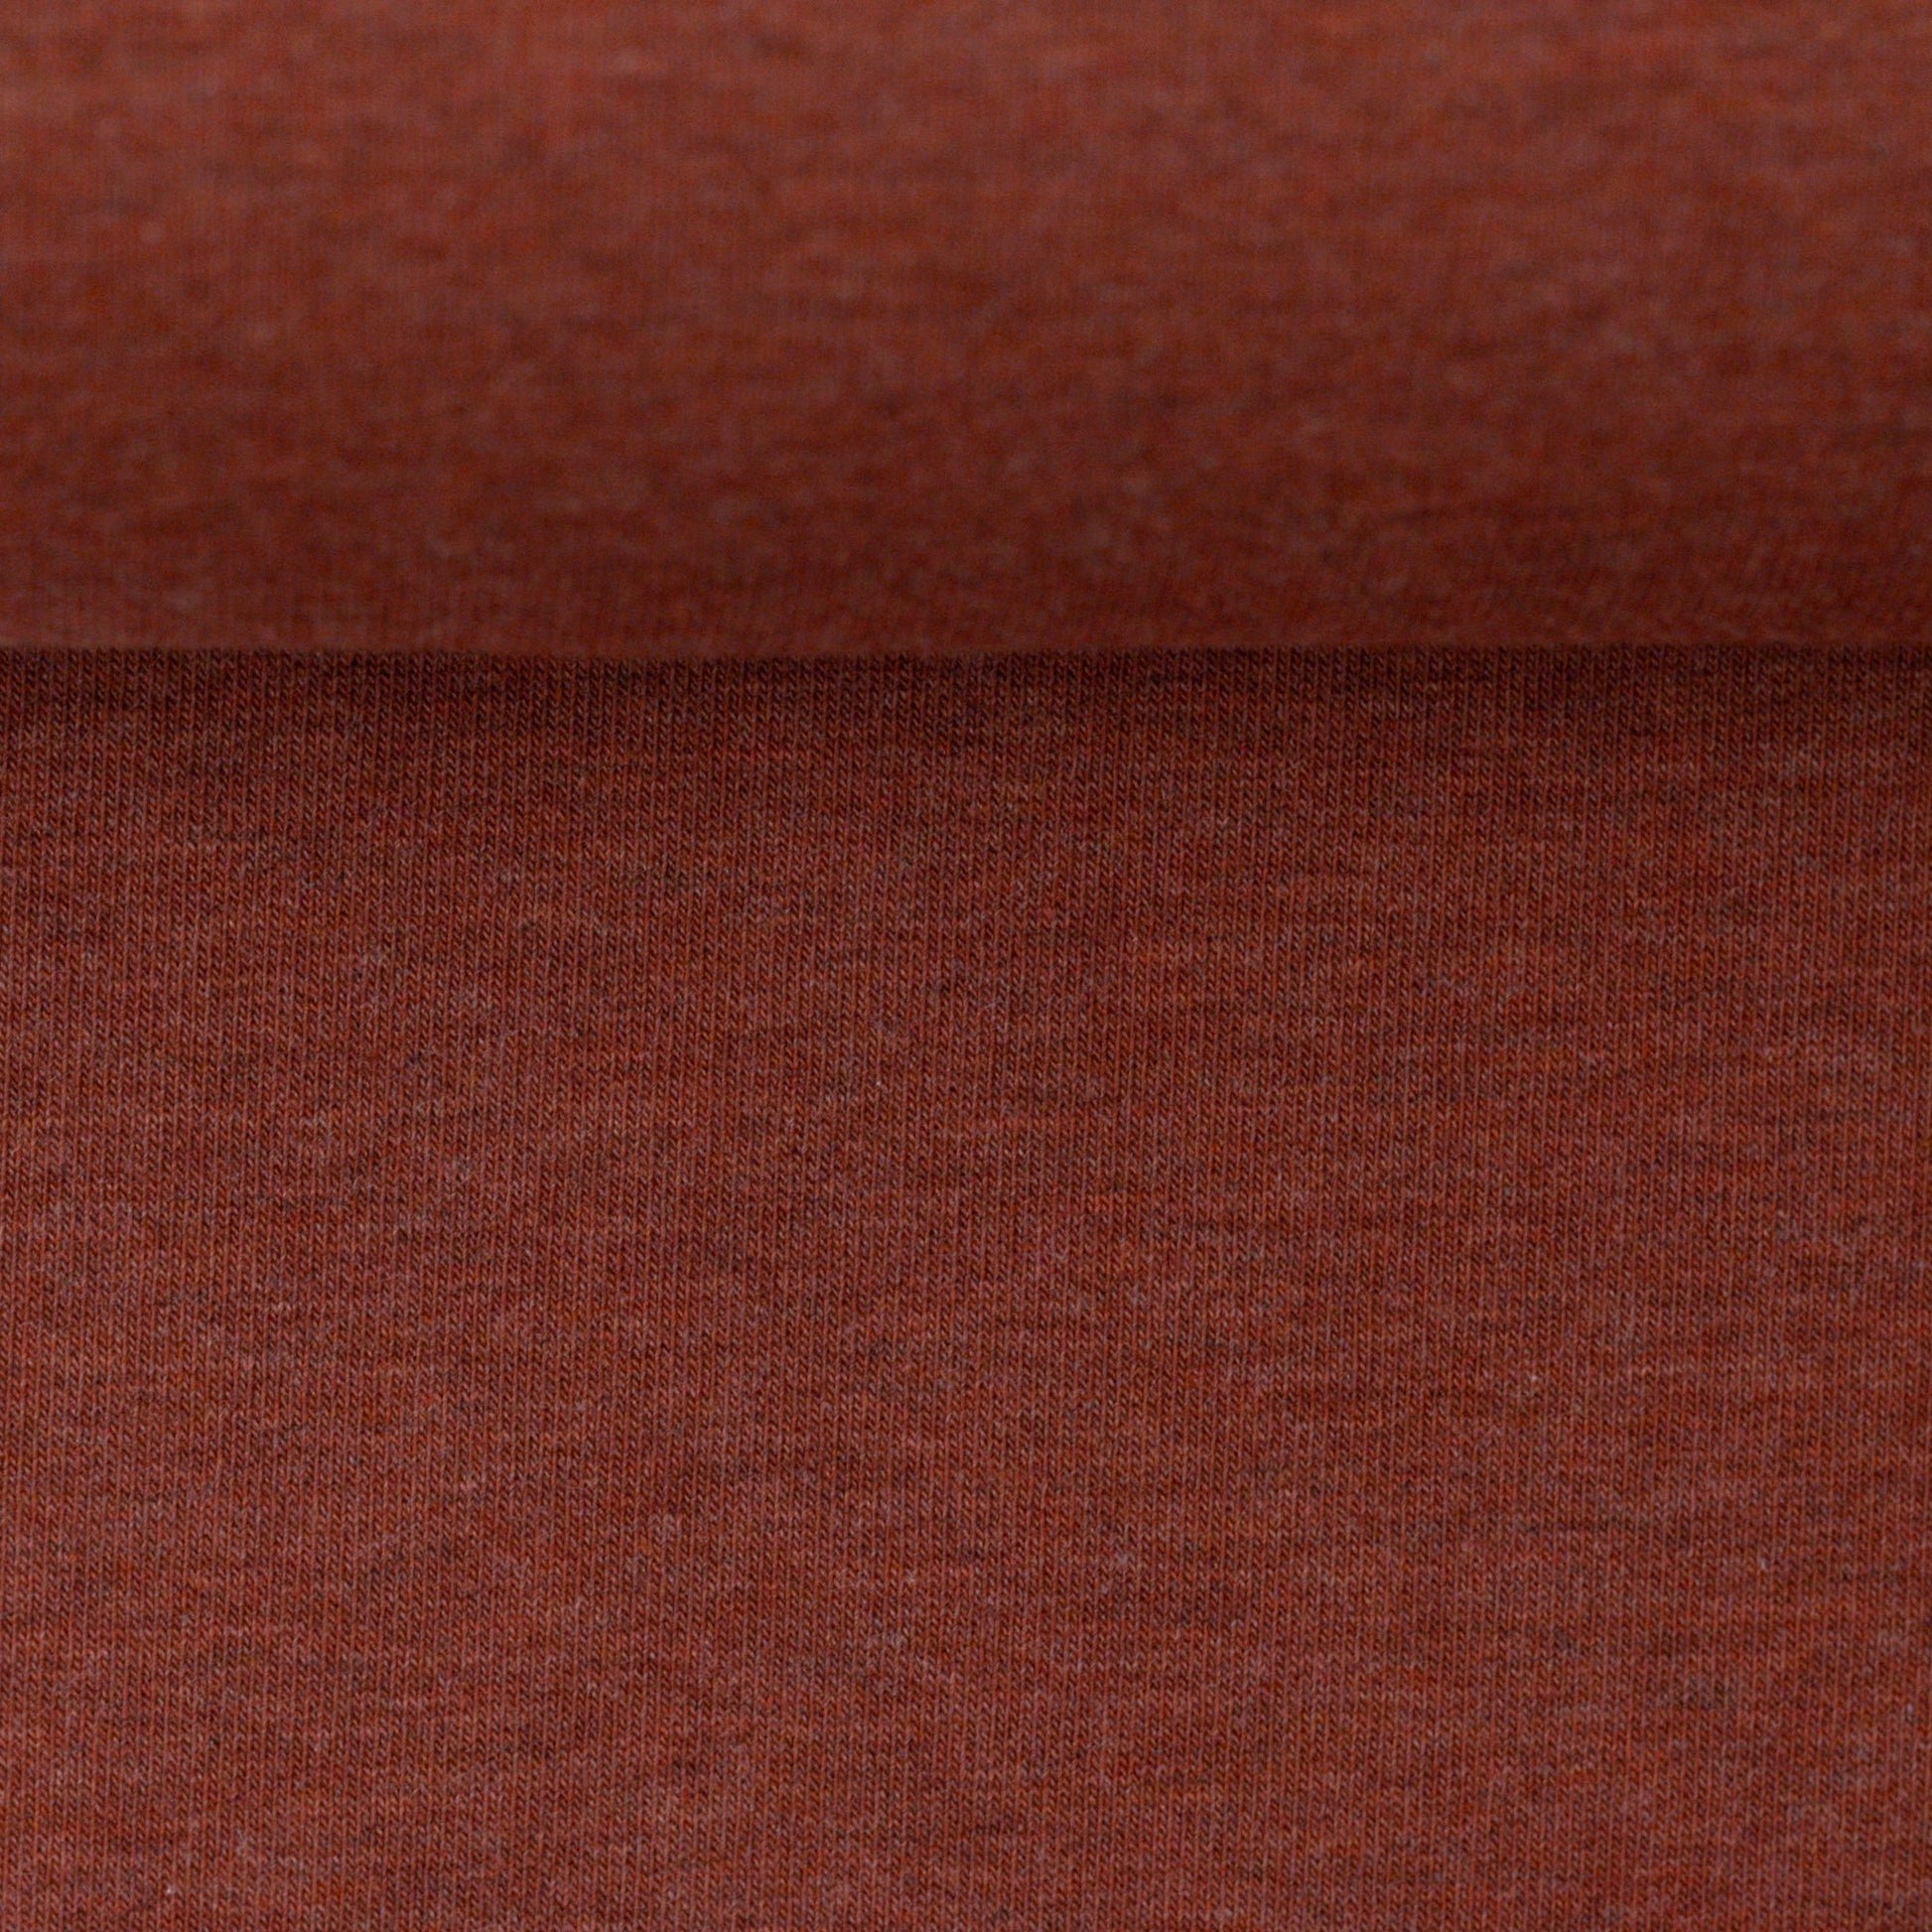 Swafing - Melange - Burgundy - Euro-ribbing - Jersey - French Terry - Fleeced French Terry - 1339 - Little Rhody Sewing Co.